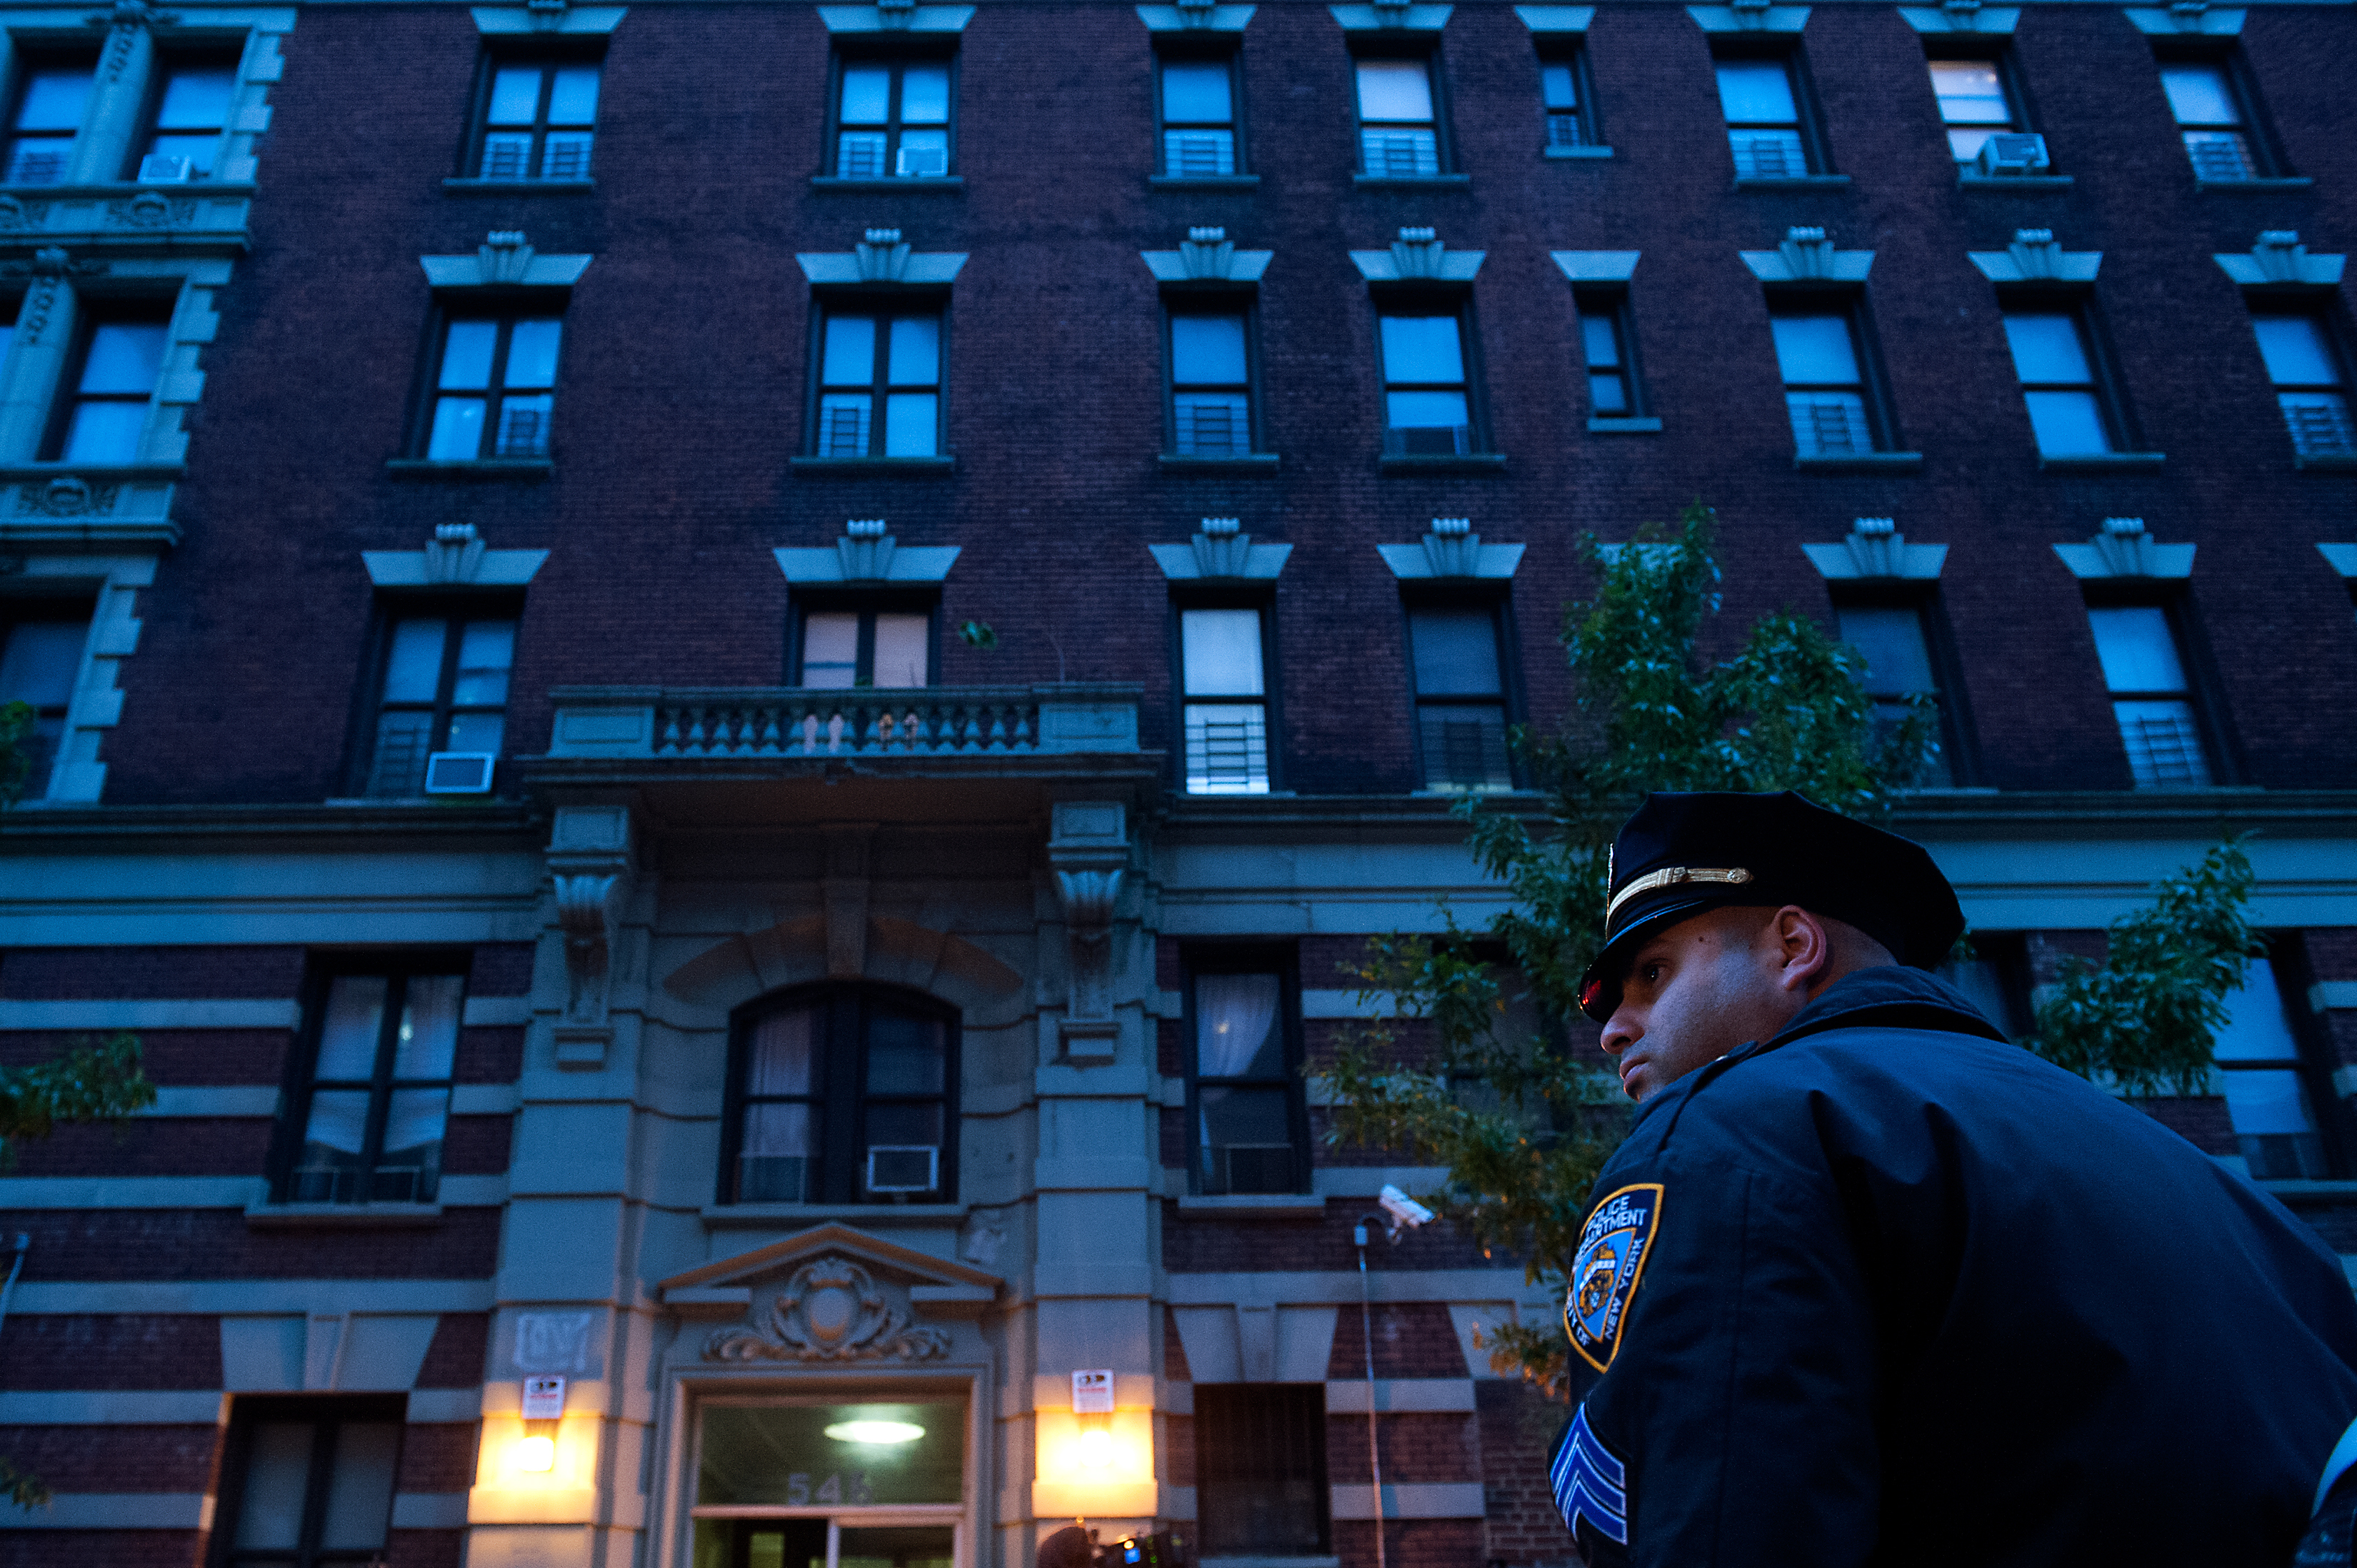 Police officers stand outside 546 W. 147th street, the apartment building of Dr. Craig Spencer on Oct. 23, 2014 in New York City.